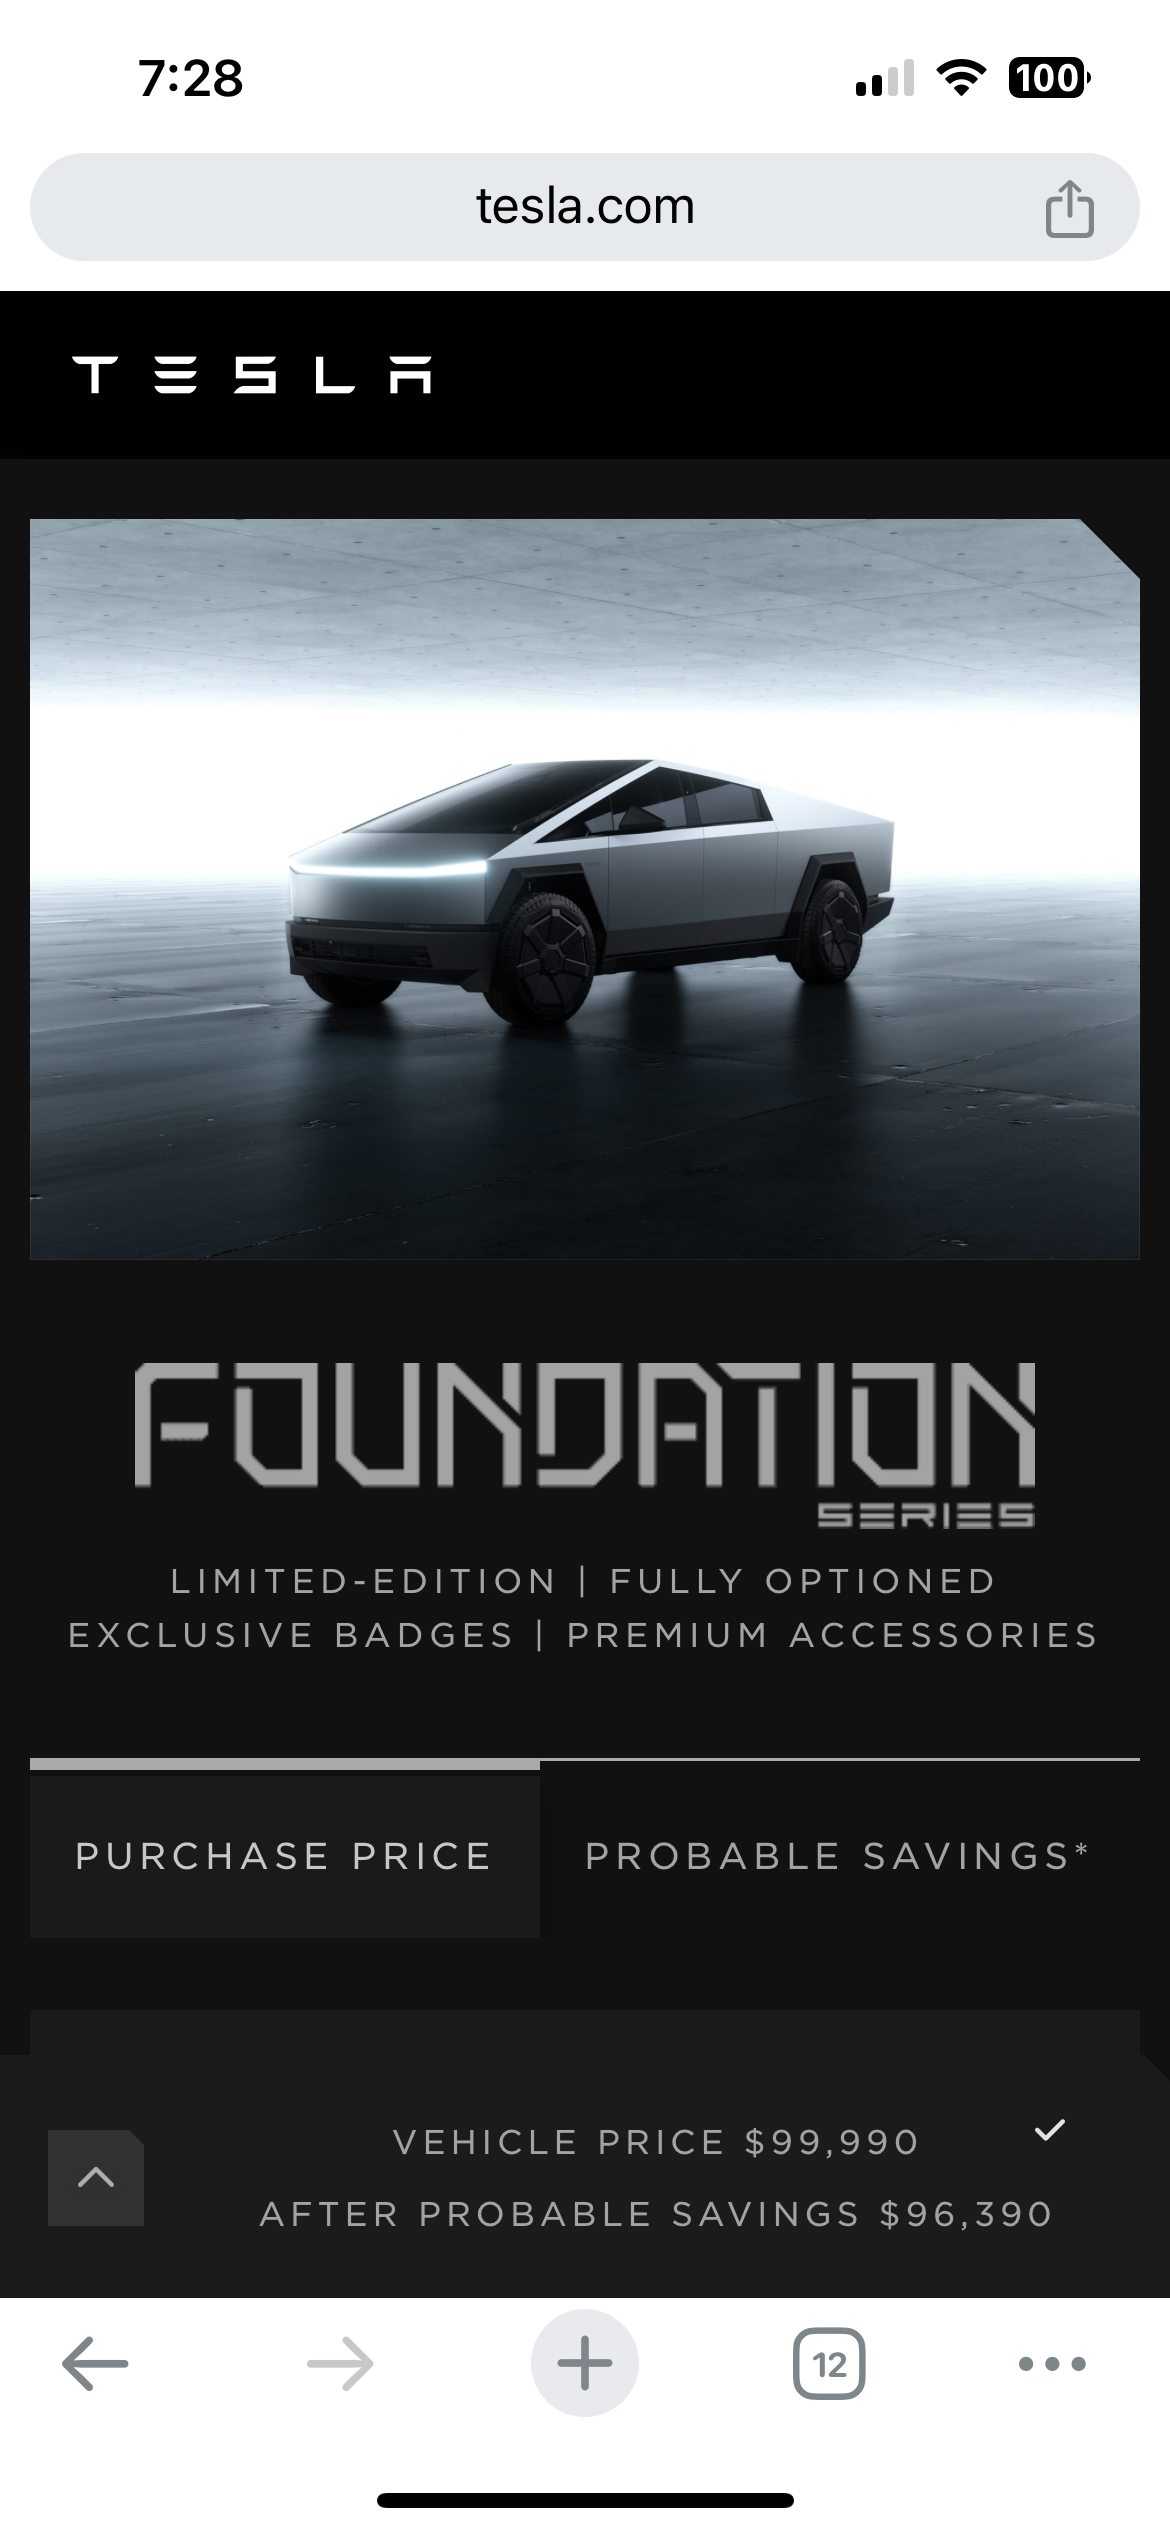 Tesla Cybertruck Your Limited-Edition Foundation Series Cybertruck is Ready to Order IMG_0853